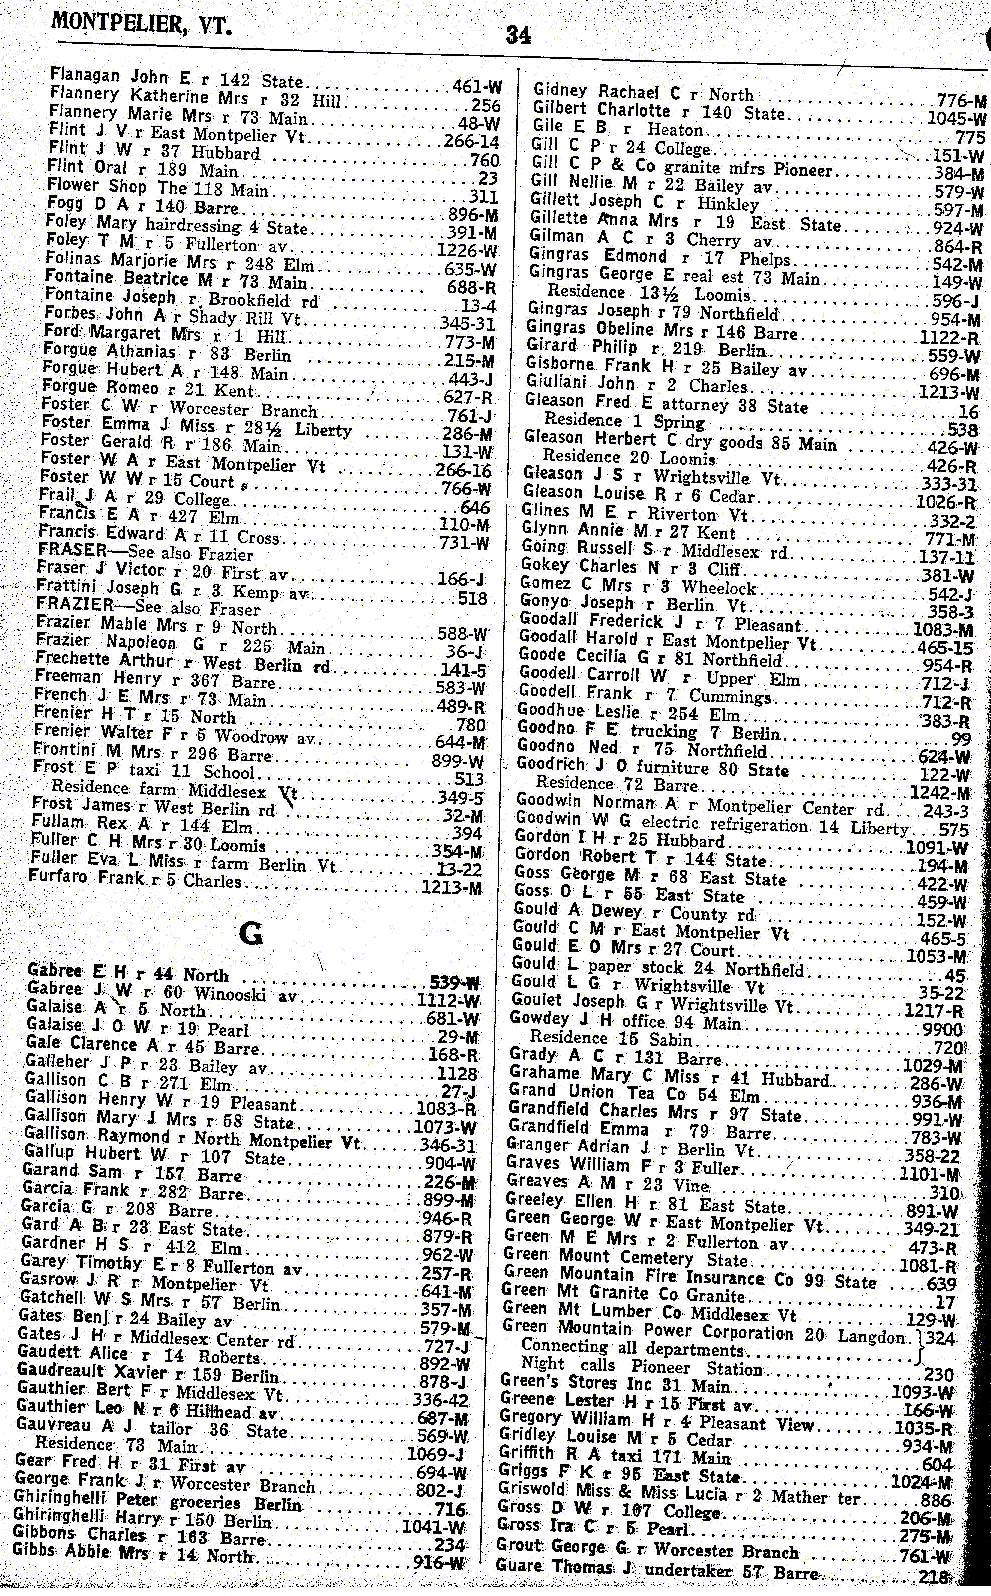 1928 Montpelier Vt Telephone Book - Page 34